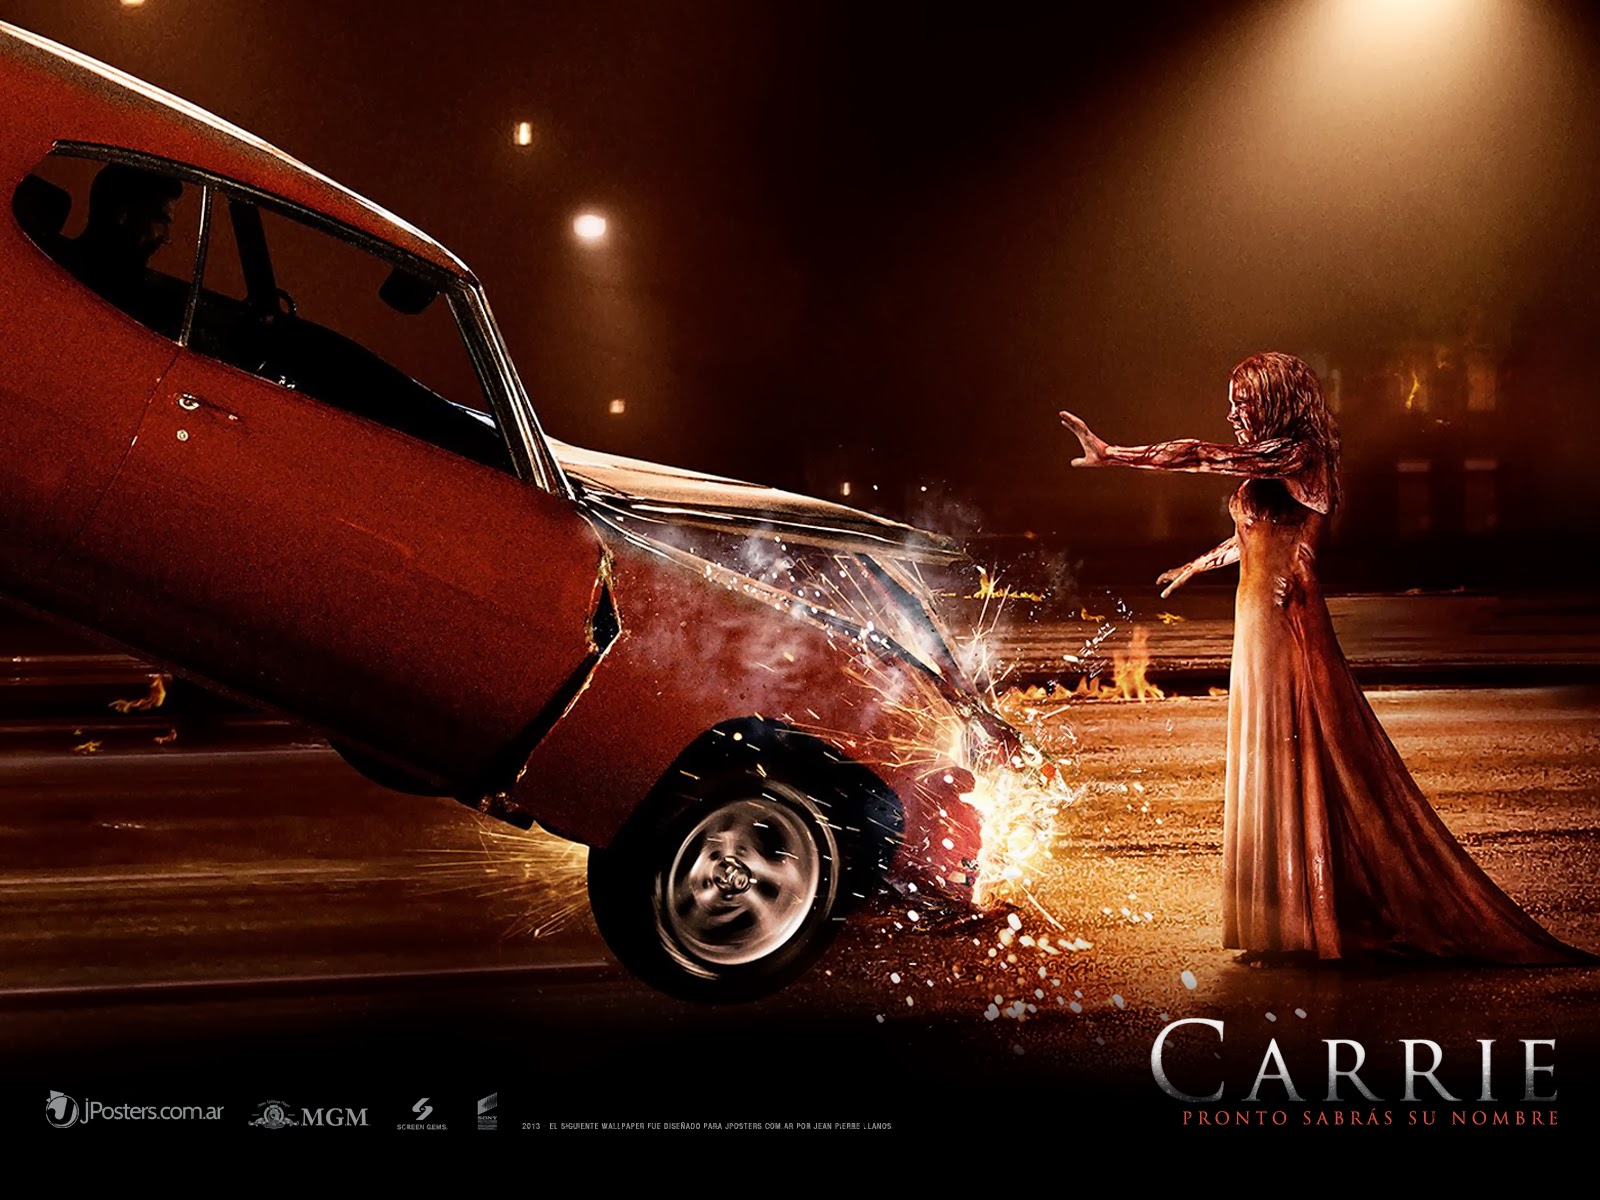 Movie Carrie (2013) Wallpaper